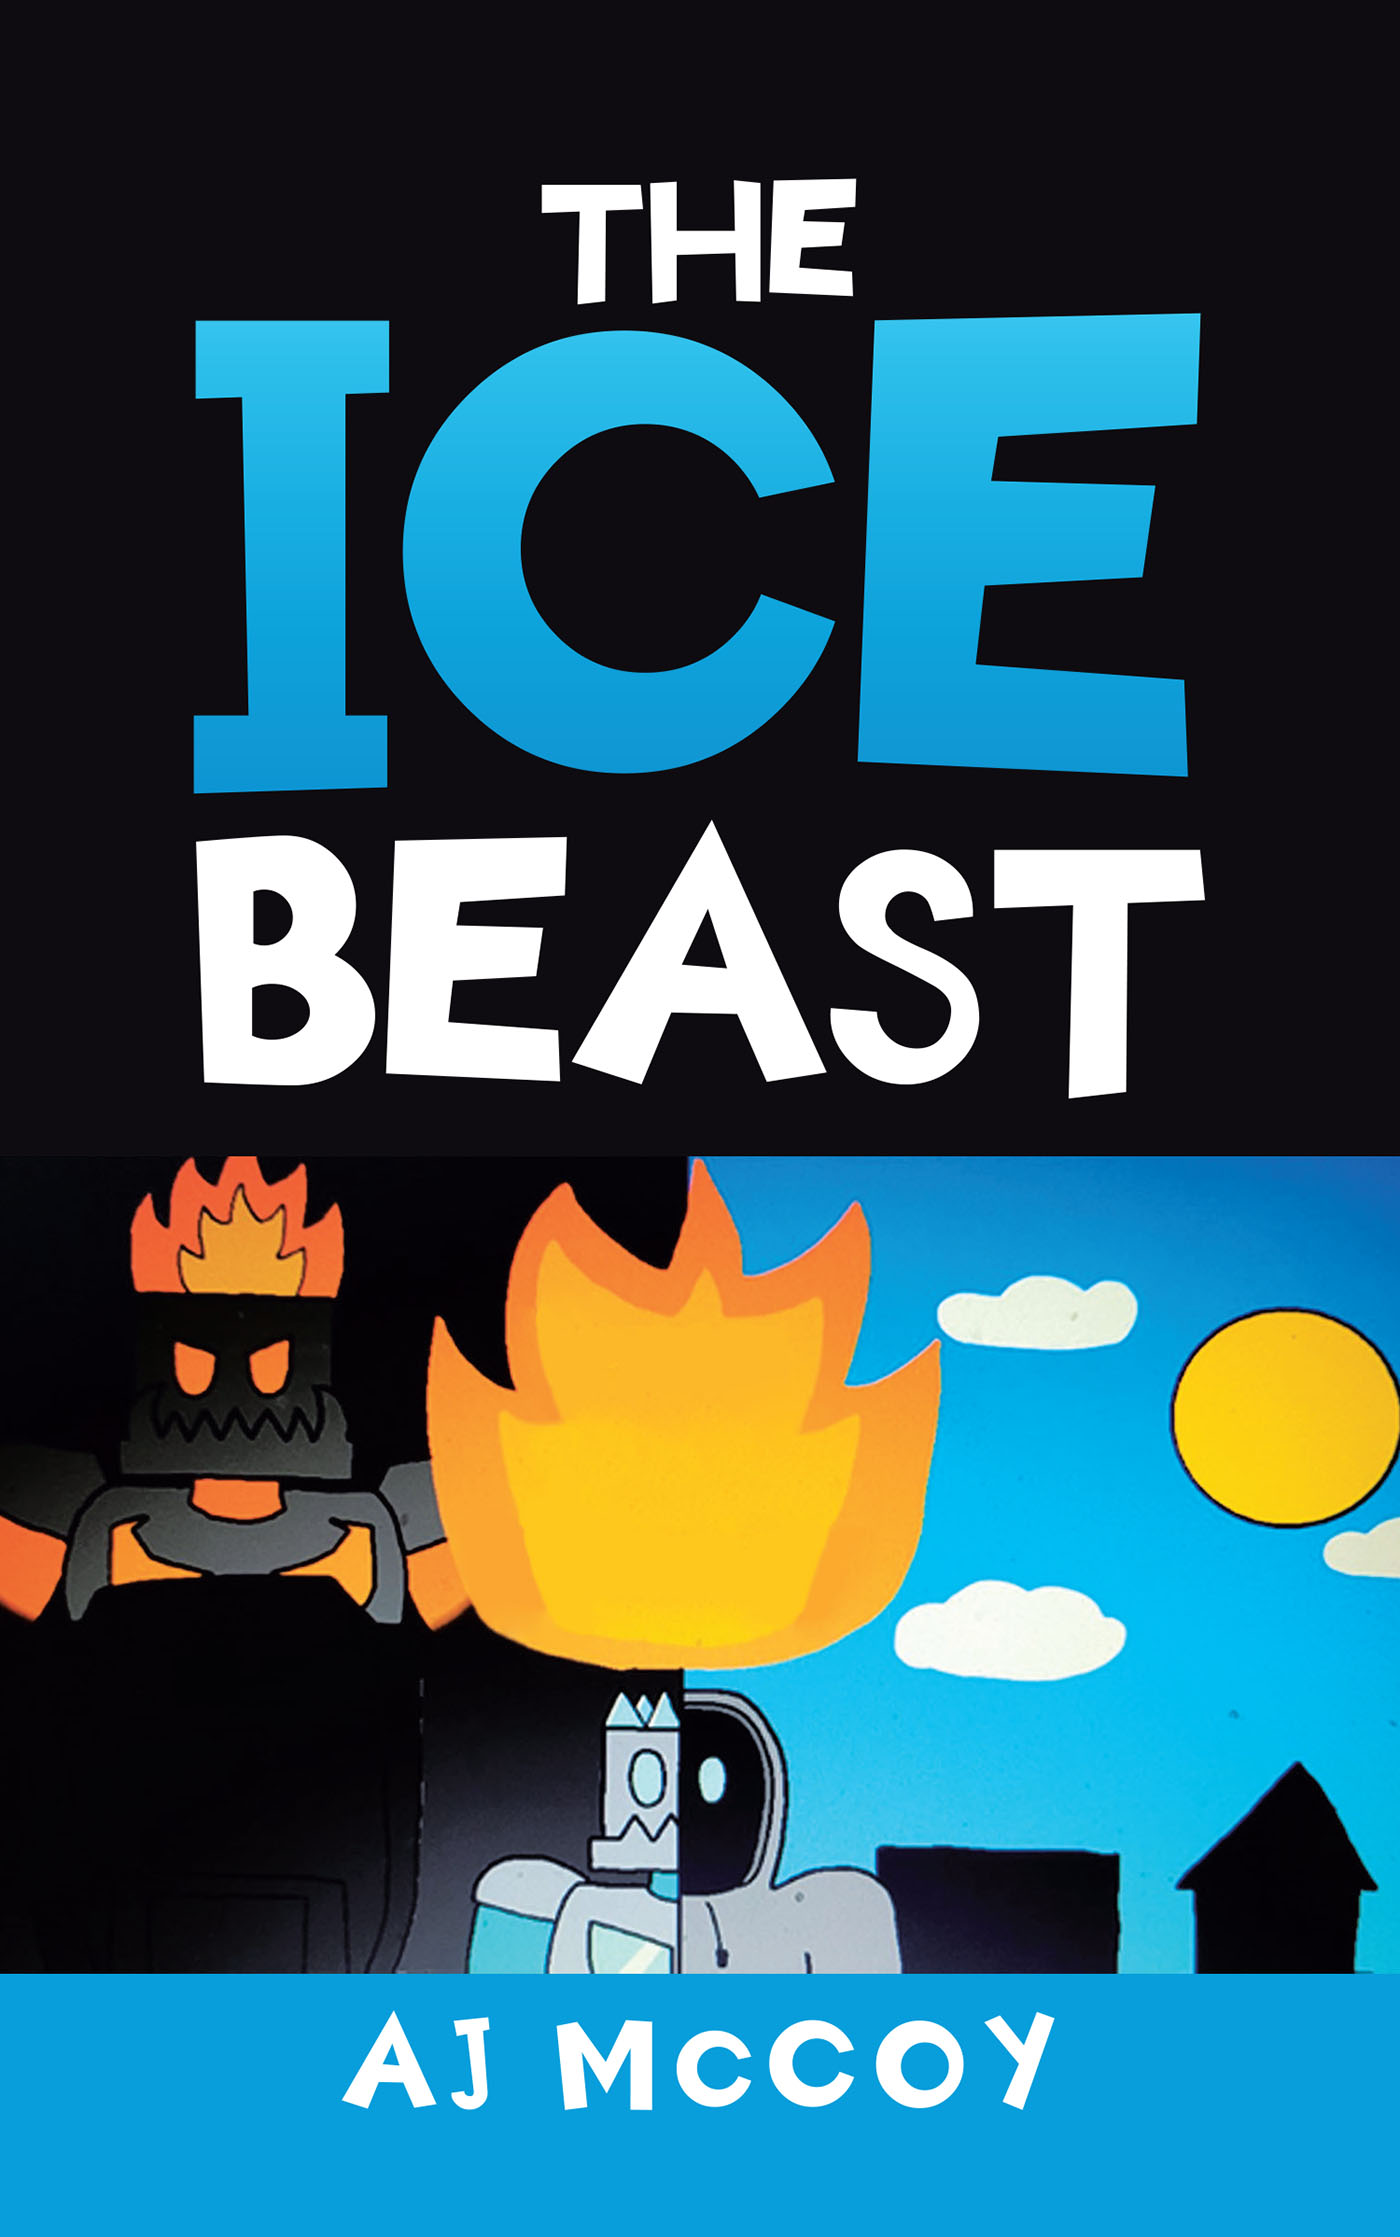 Author AJ McCoy’s New Book, “The Ice Beast,” is an Unpredictable Adventure Story That Takes Readers Into an Exhilarating World of Beasts